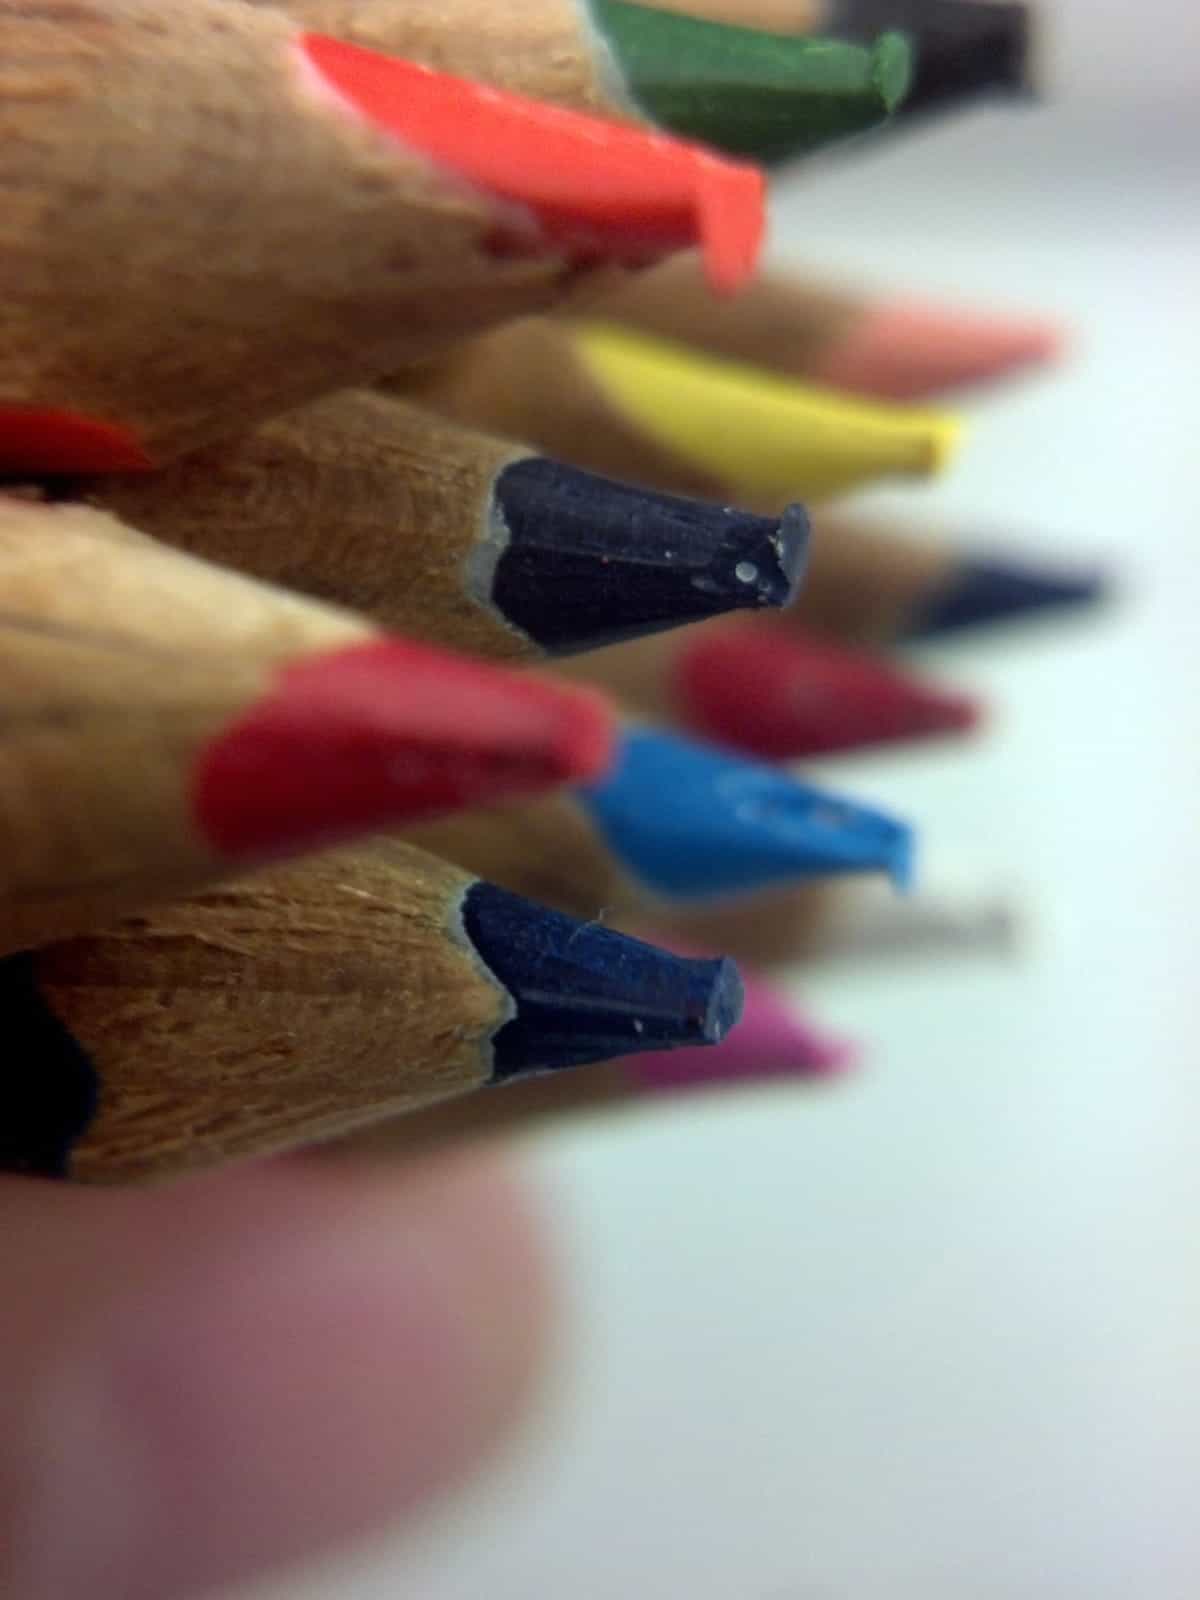 A close-up photo of sharpened colored pencils.